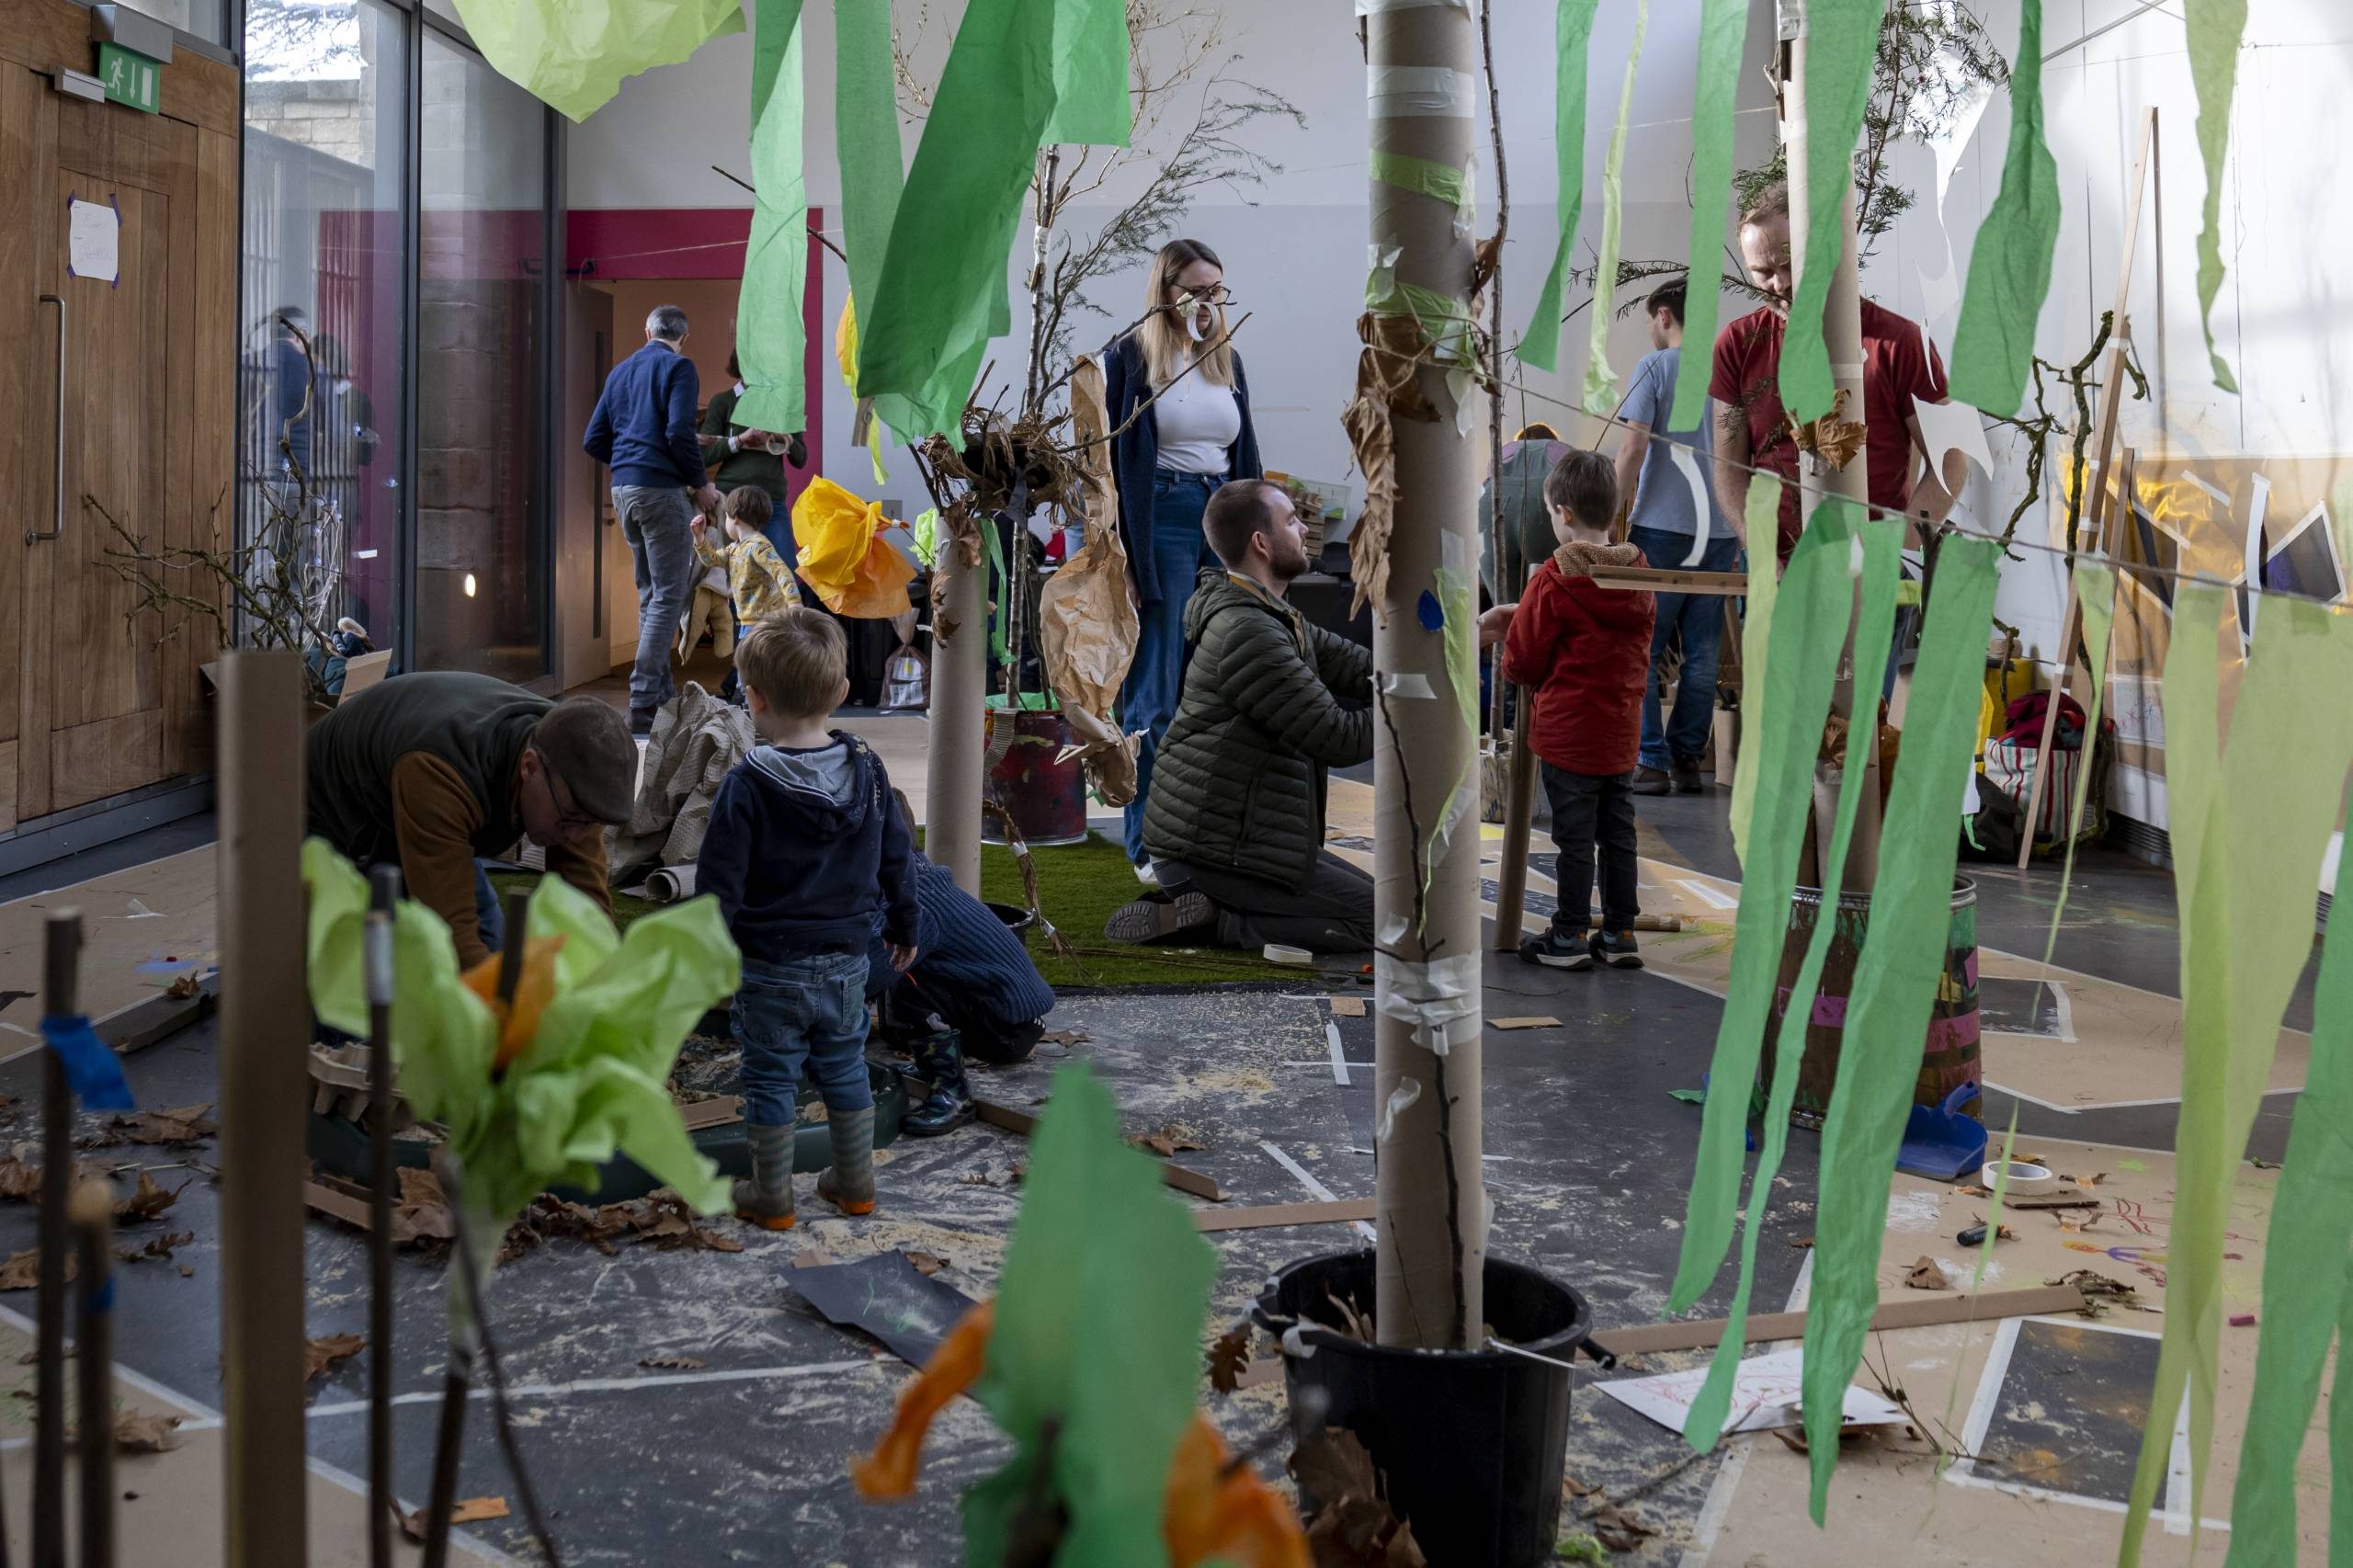 A group of adults and children play in a room filled with paper, leaves, branches and other materials.